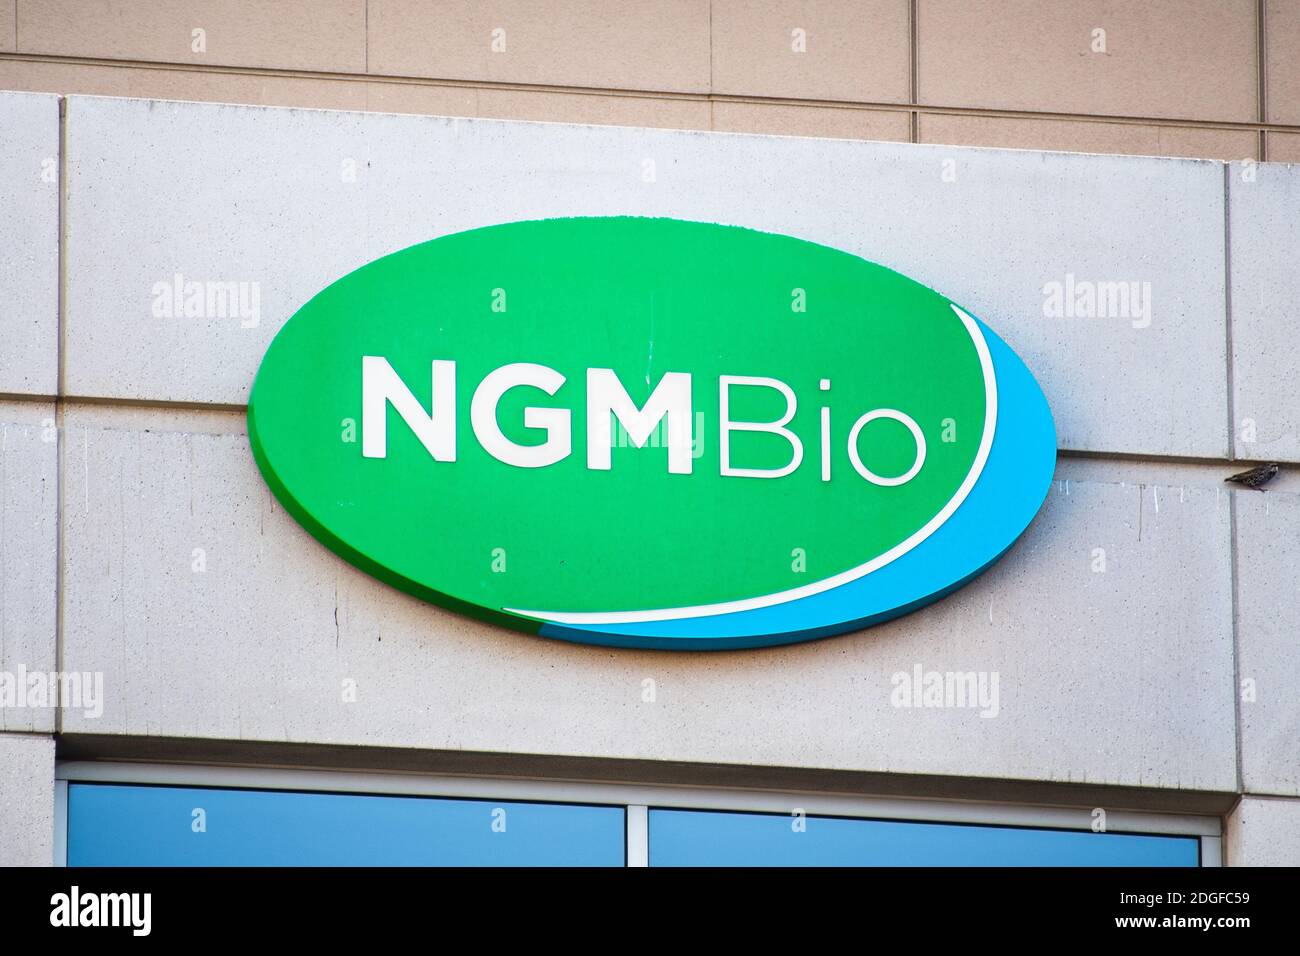 Sep 21, 2020 South San Francisco / CA / USA - NGM Bio logo at their headquarters in Silicon Valley; NGM Biopharmaceuticals, Inc. operates as a clinica Stock Photo